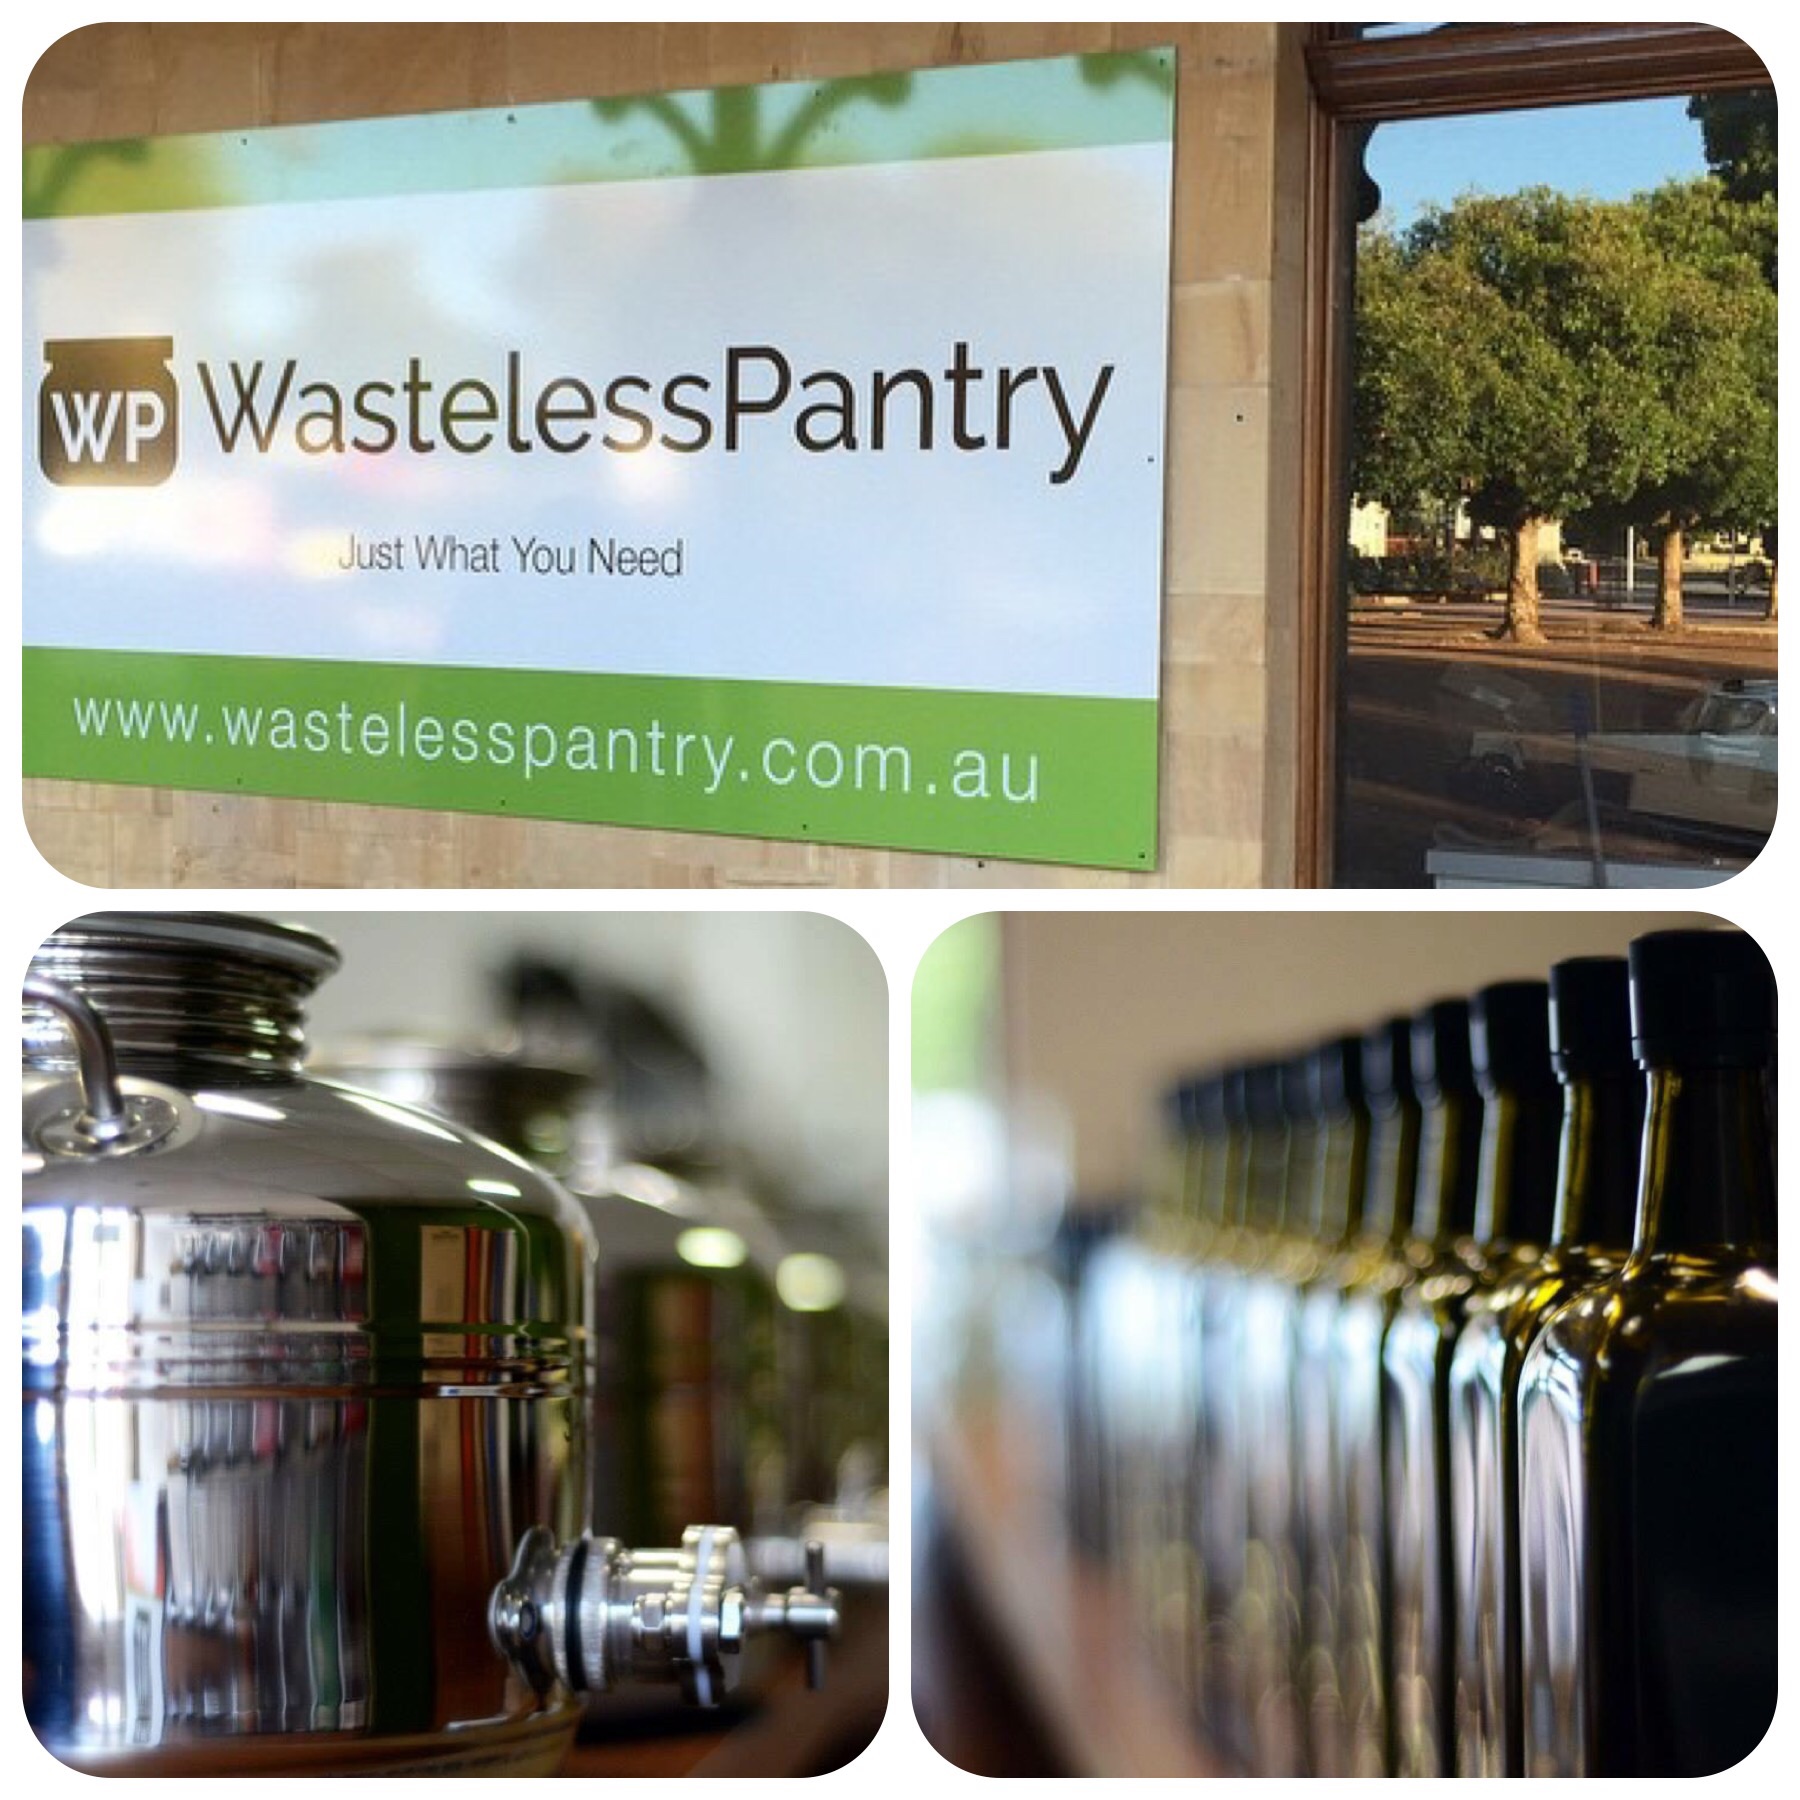 Introducing Amanda who, along with her business partner Jeannie, are adding the final touches to their new bulk grocery store the Wasteless Pantry in Western Australia. Here is an insight into how they share their knowledge on living a sustainable, simpler and easier existence; filing your life only with those good things you choose.